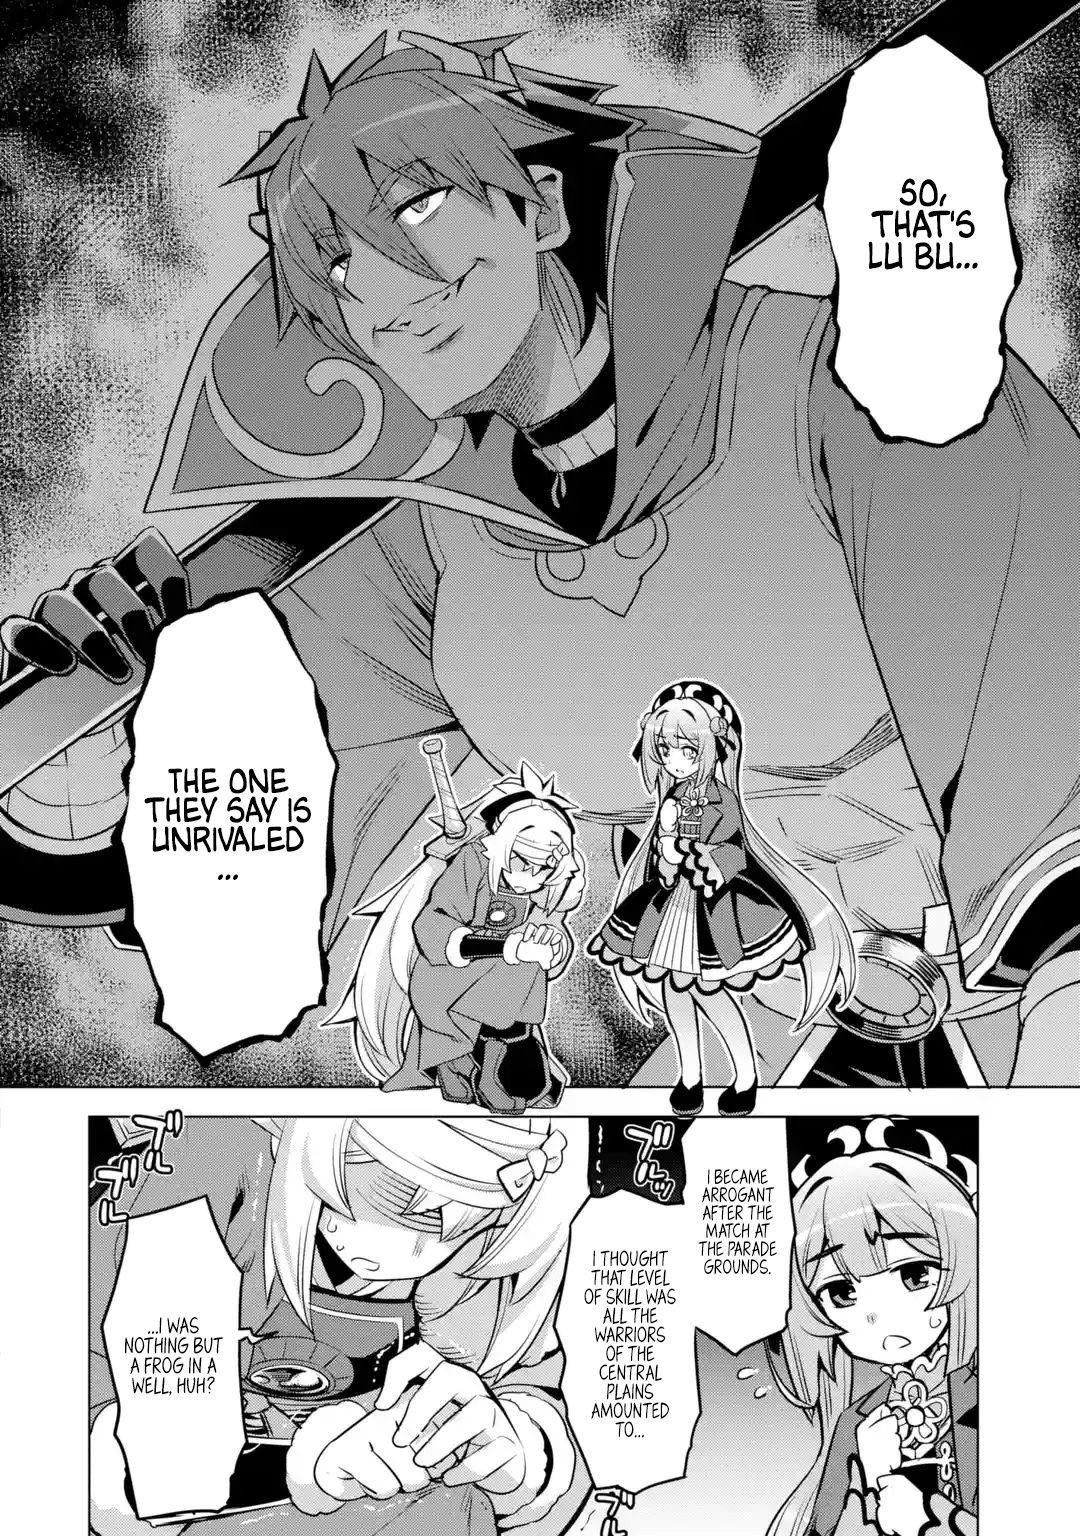 Awakening In The Three Kingdoms As The Demon’S Daughter ~The Legend Of Dong Bai~ - Page 2